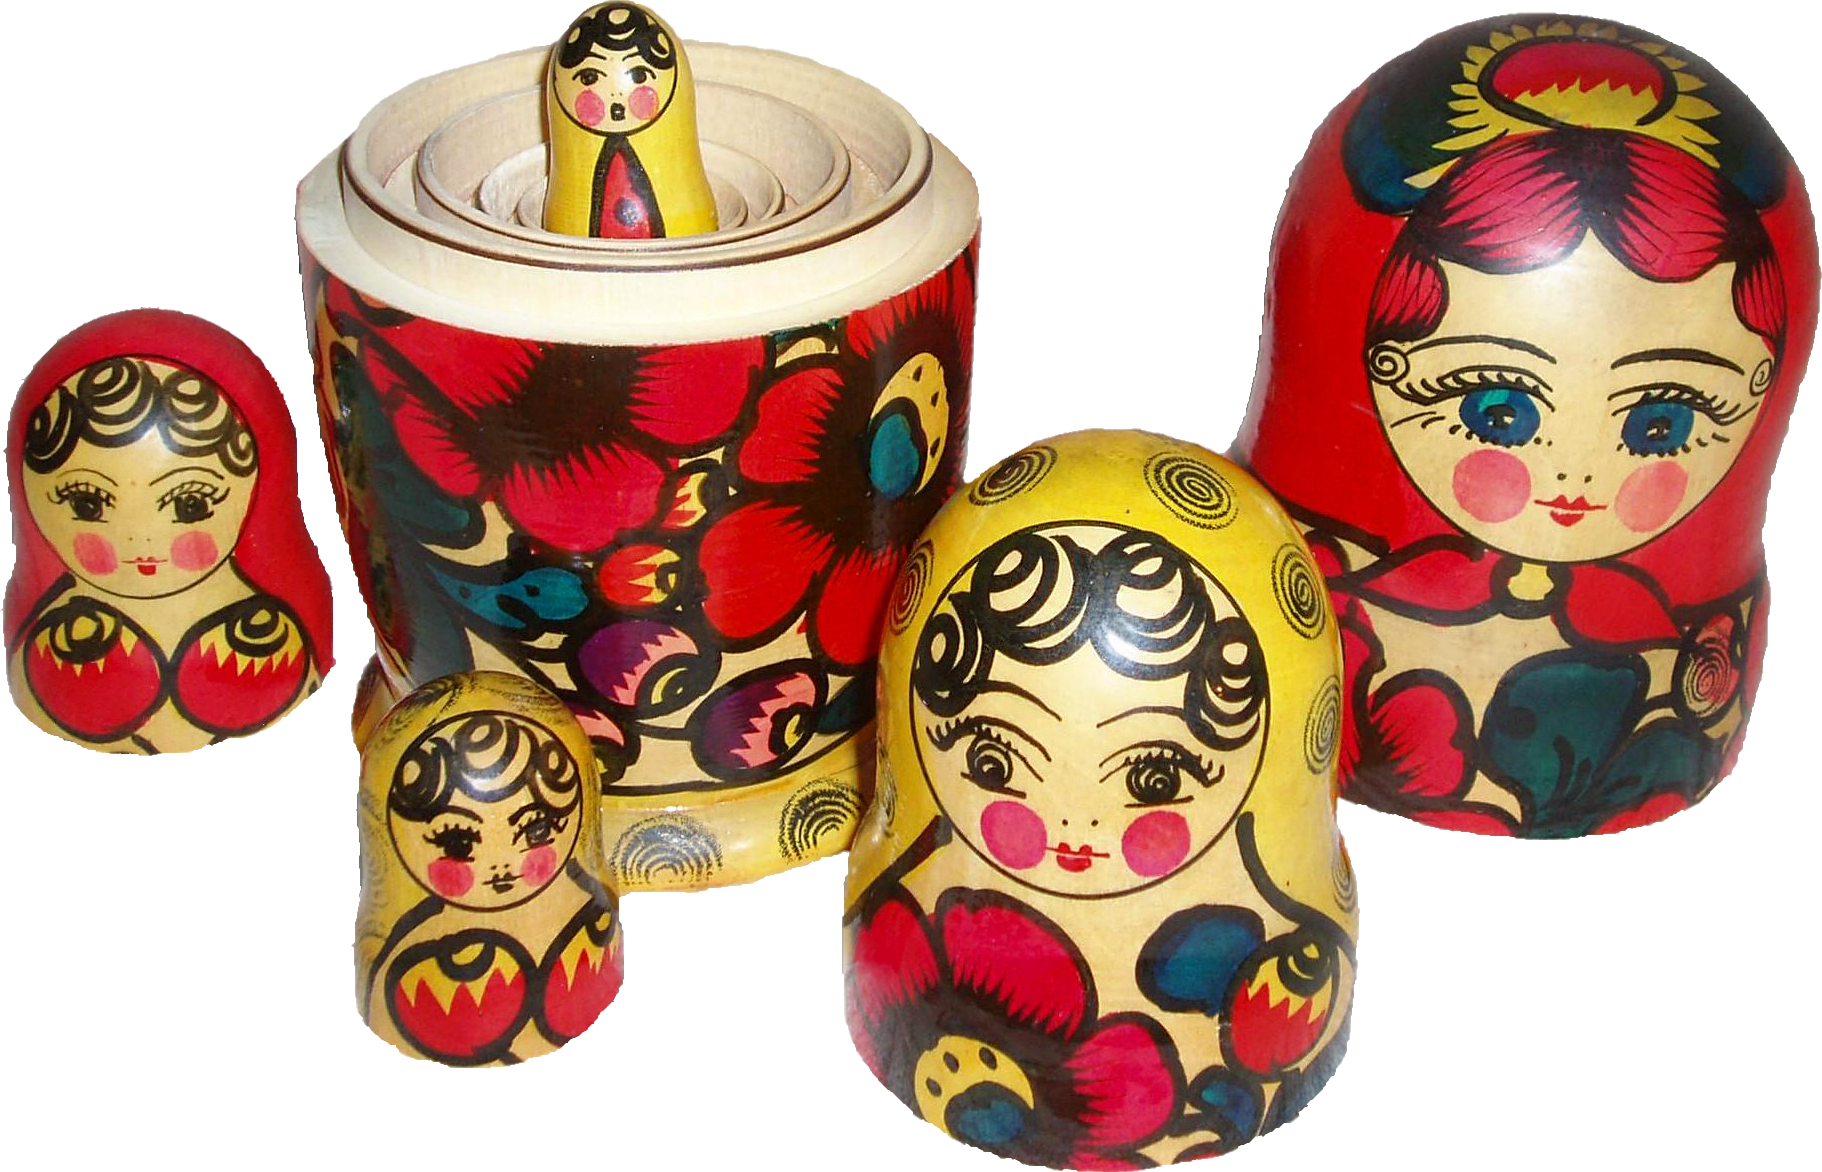 The concept of the Russian dolls is used as a visual example in various topics